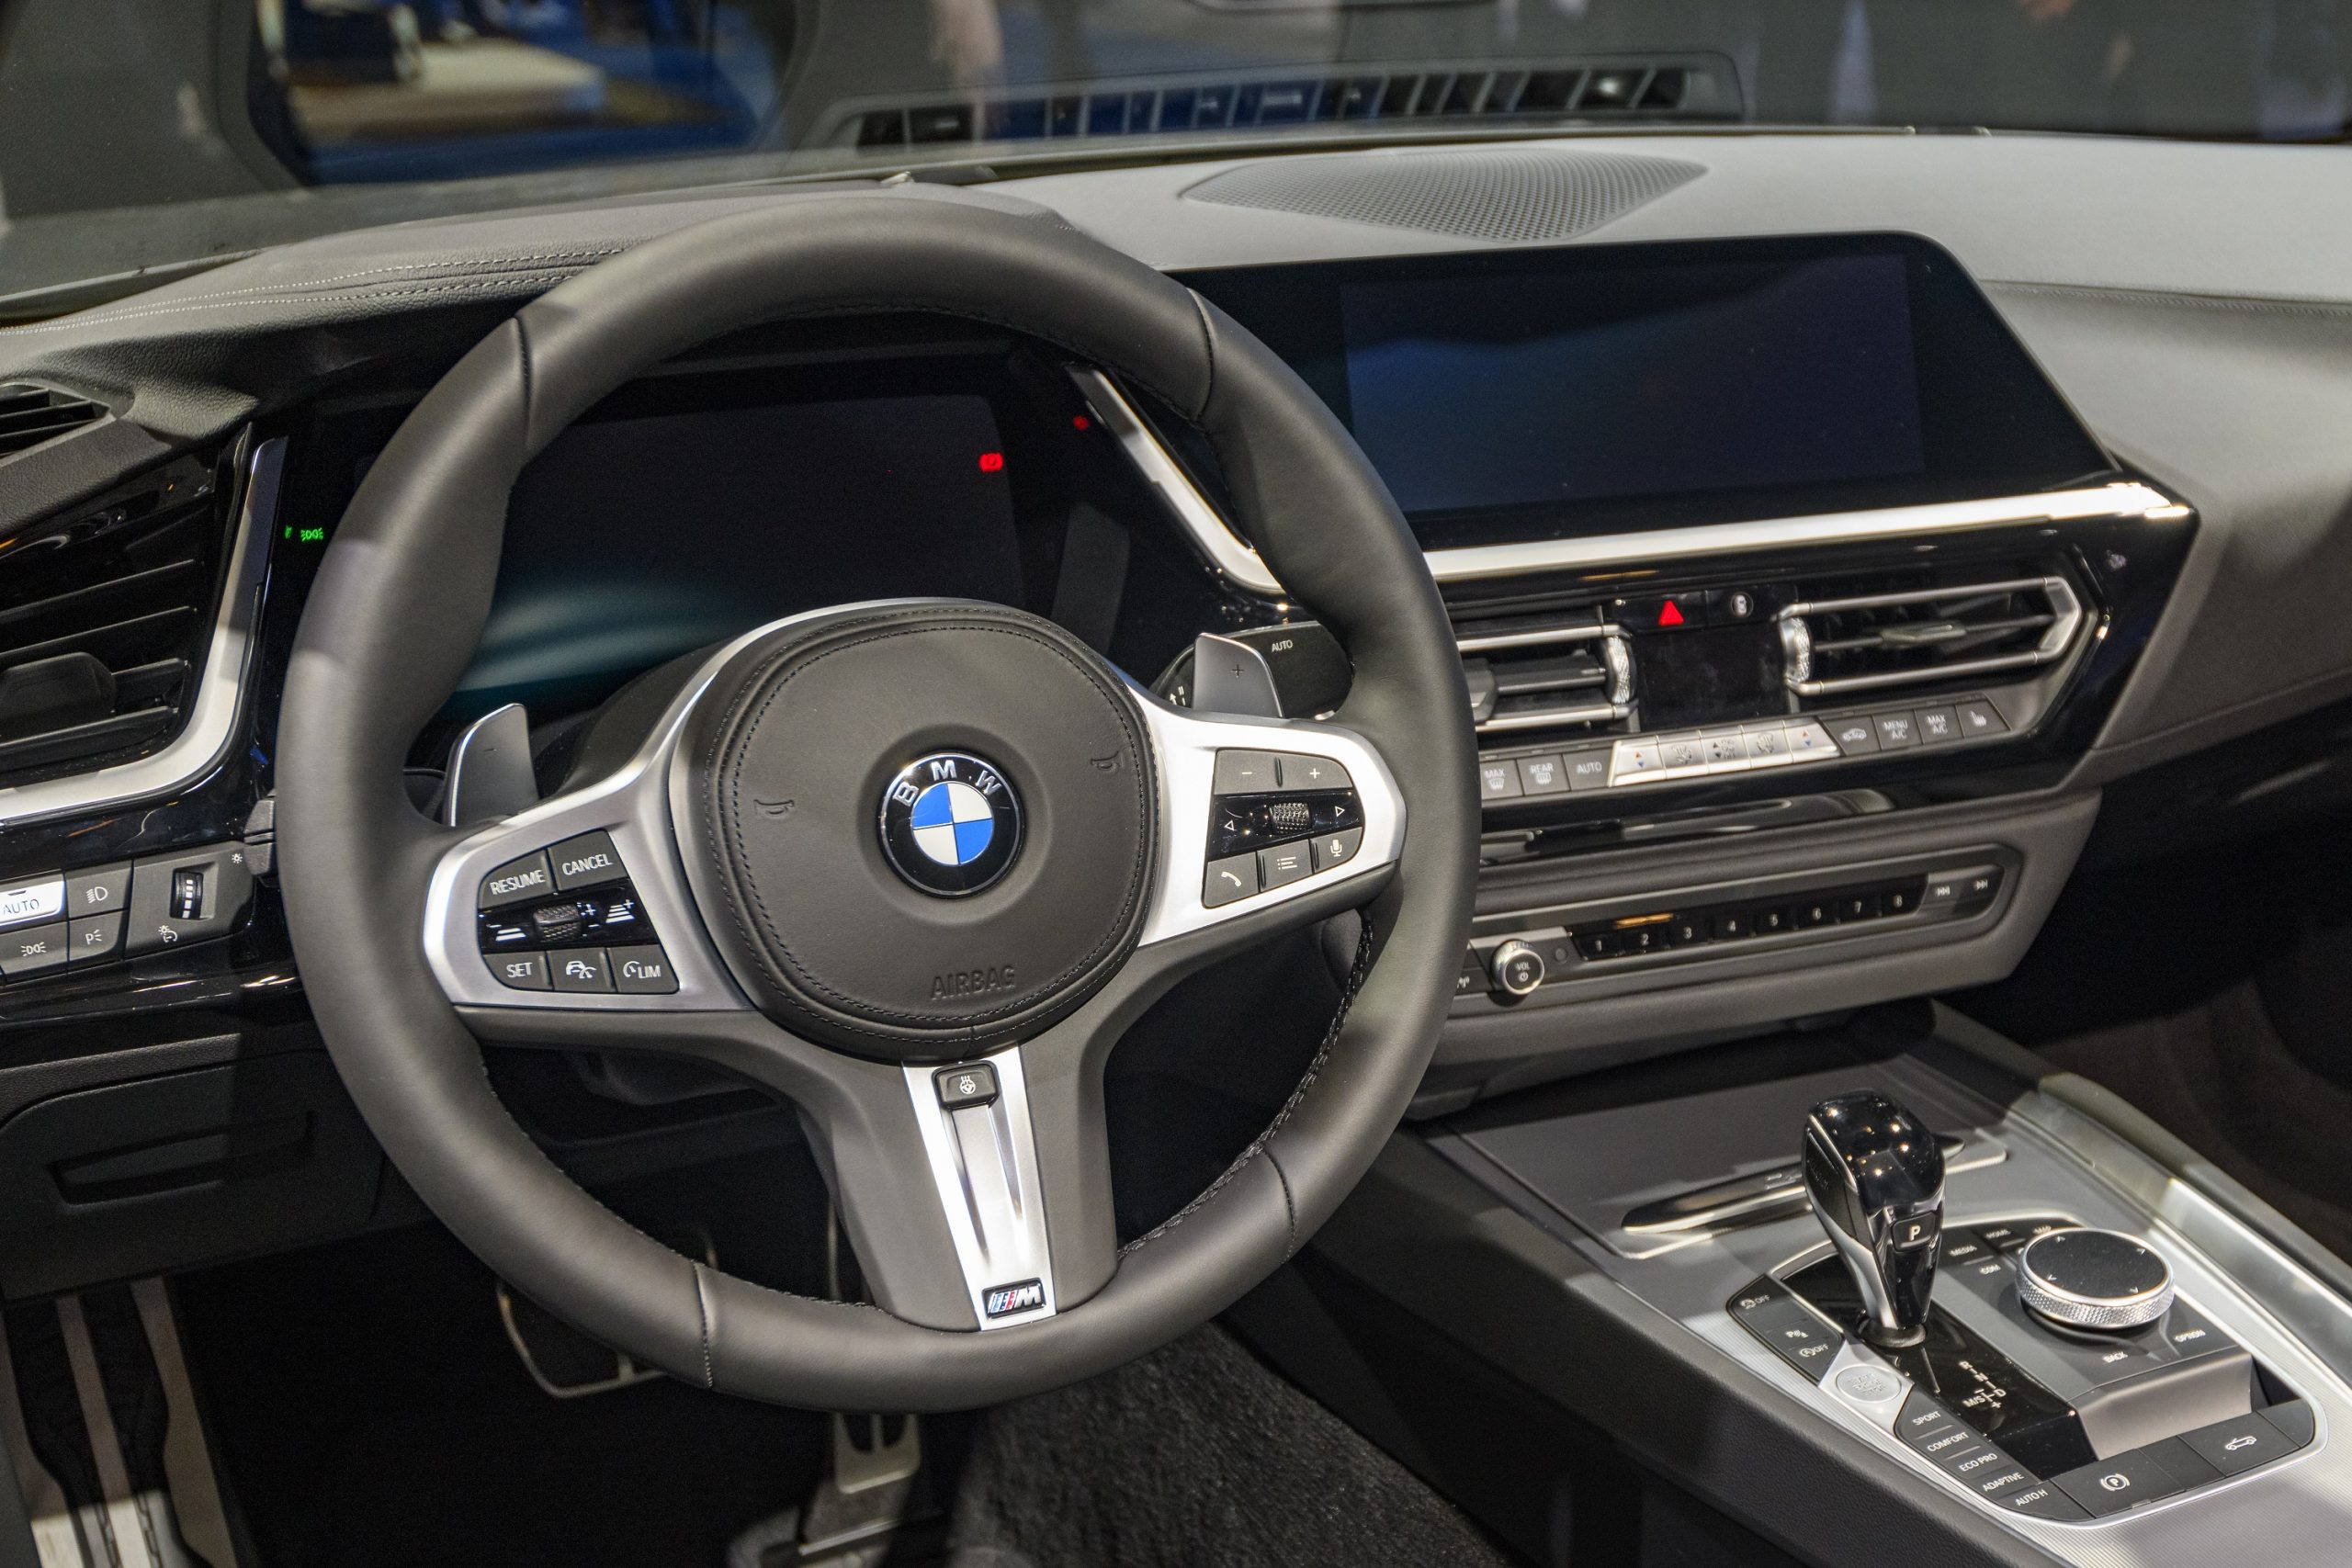 A new BMW interior with black leather and chrome accents